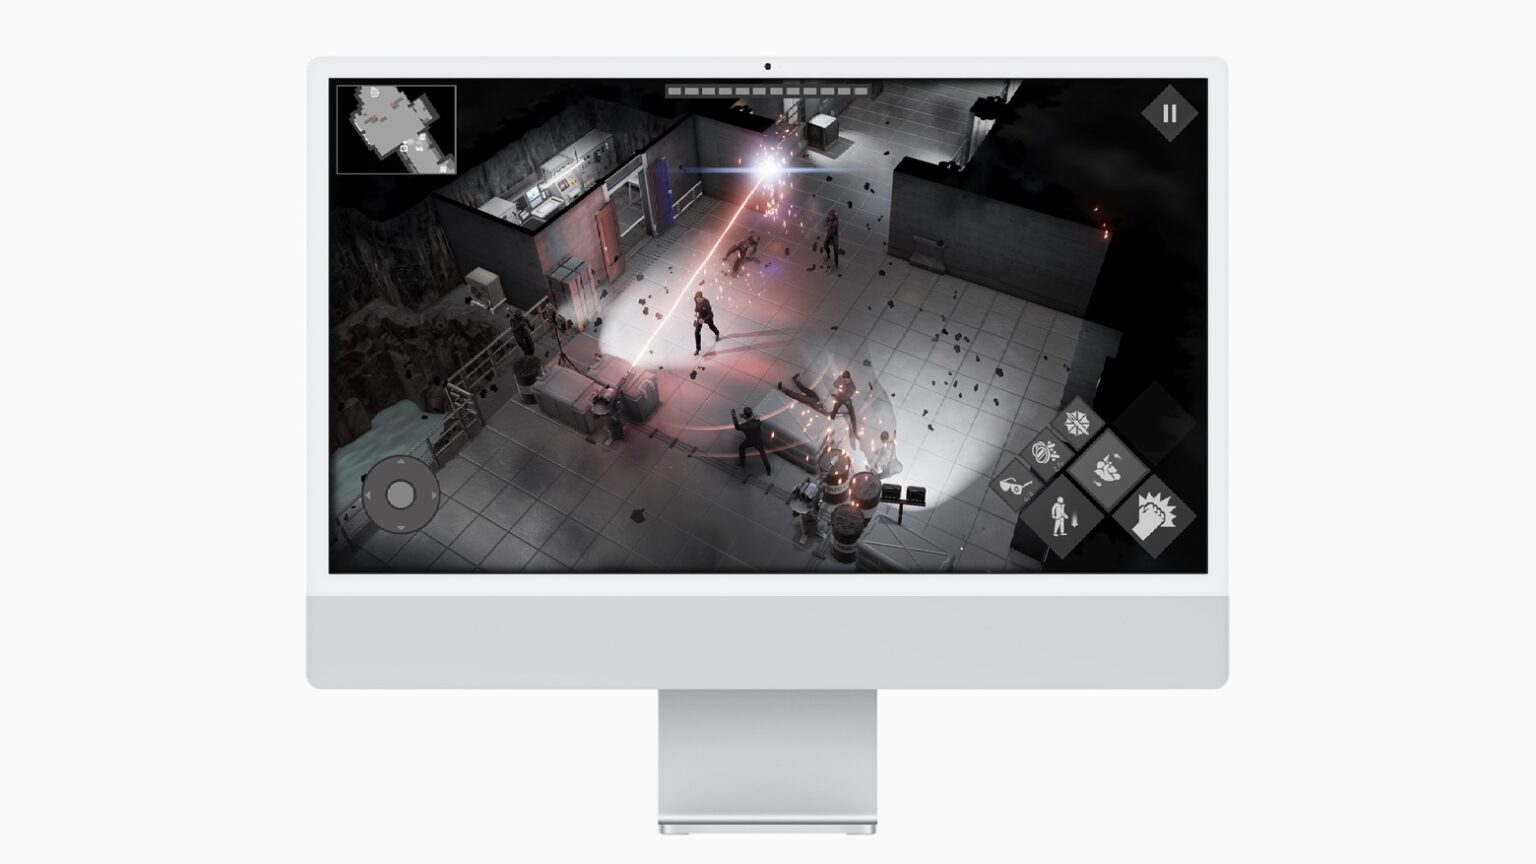 Become James Bond and battle Spectre in 'Cypher 007' stealth adventure game